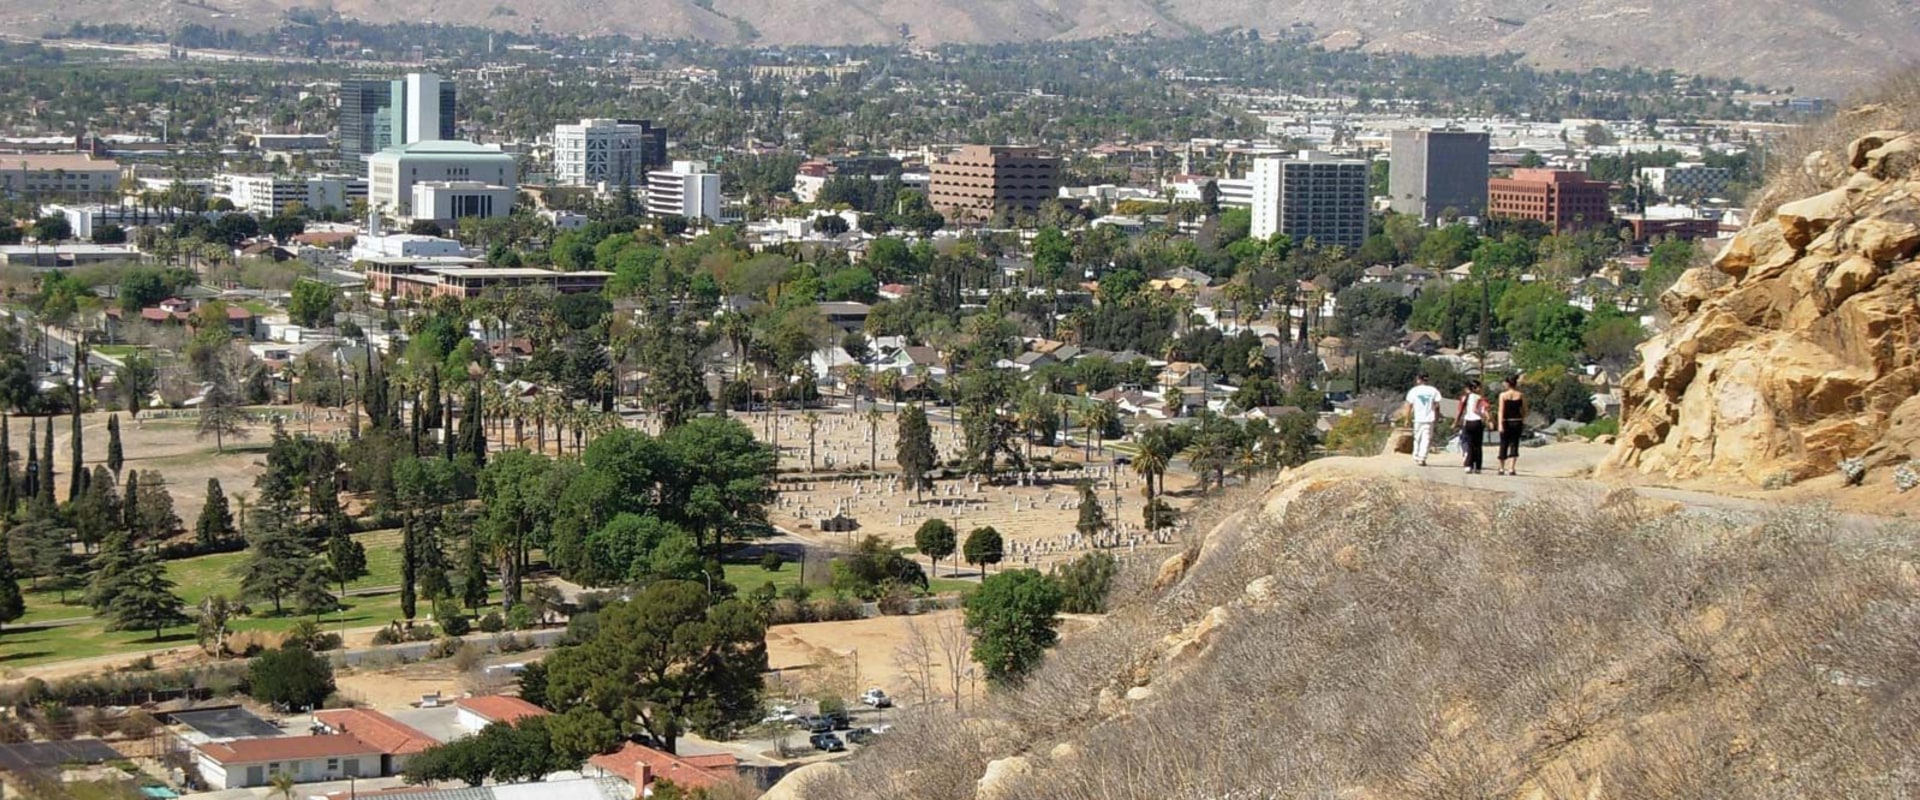 Is Working for Riverside County a Good Choice? - An Expert's Perspective